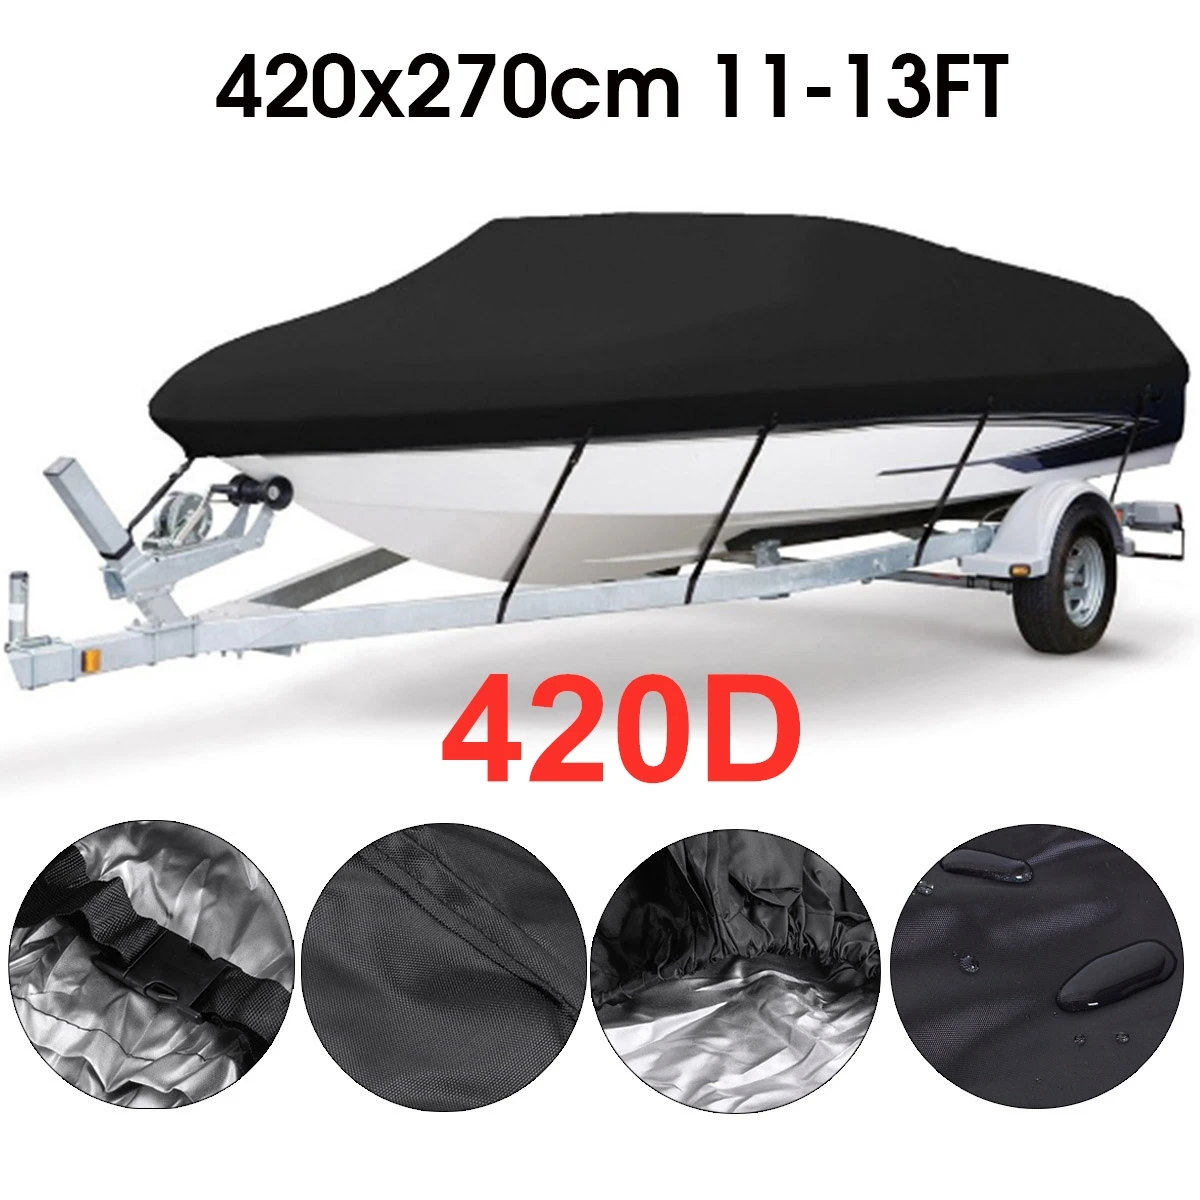 11-13/14-16/17-19/20-22ft 420D barco Boat Cover Anti-UV Waterproof Heavy Duty Marine Trailerable Canvas Boat Accessories